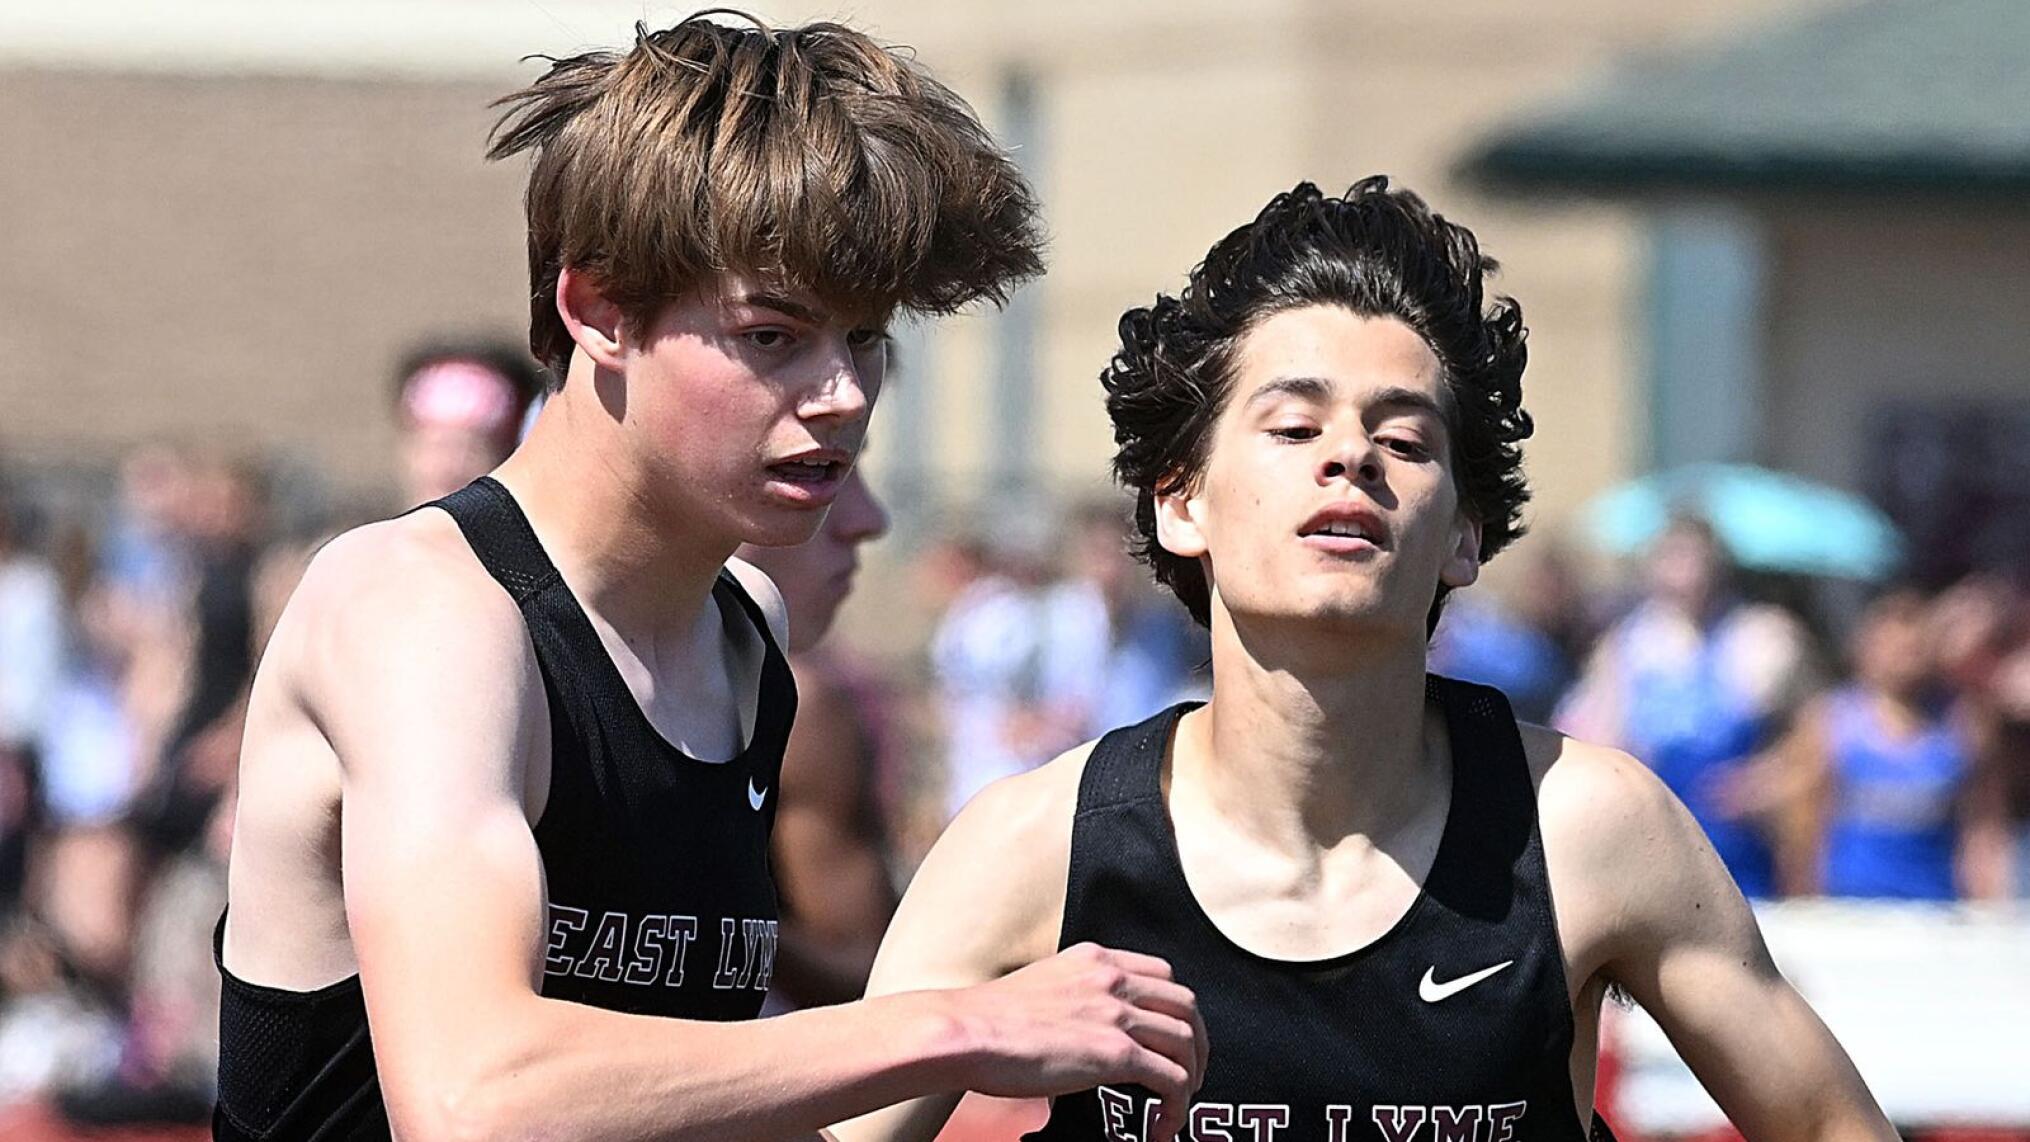 It’s Gates with the clincher for East Lyme boys in ECC Division I track